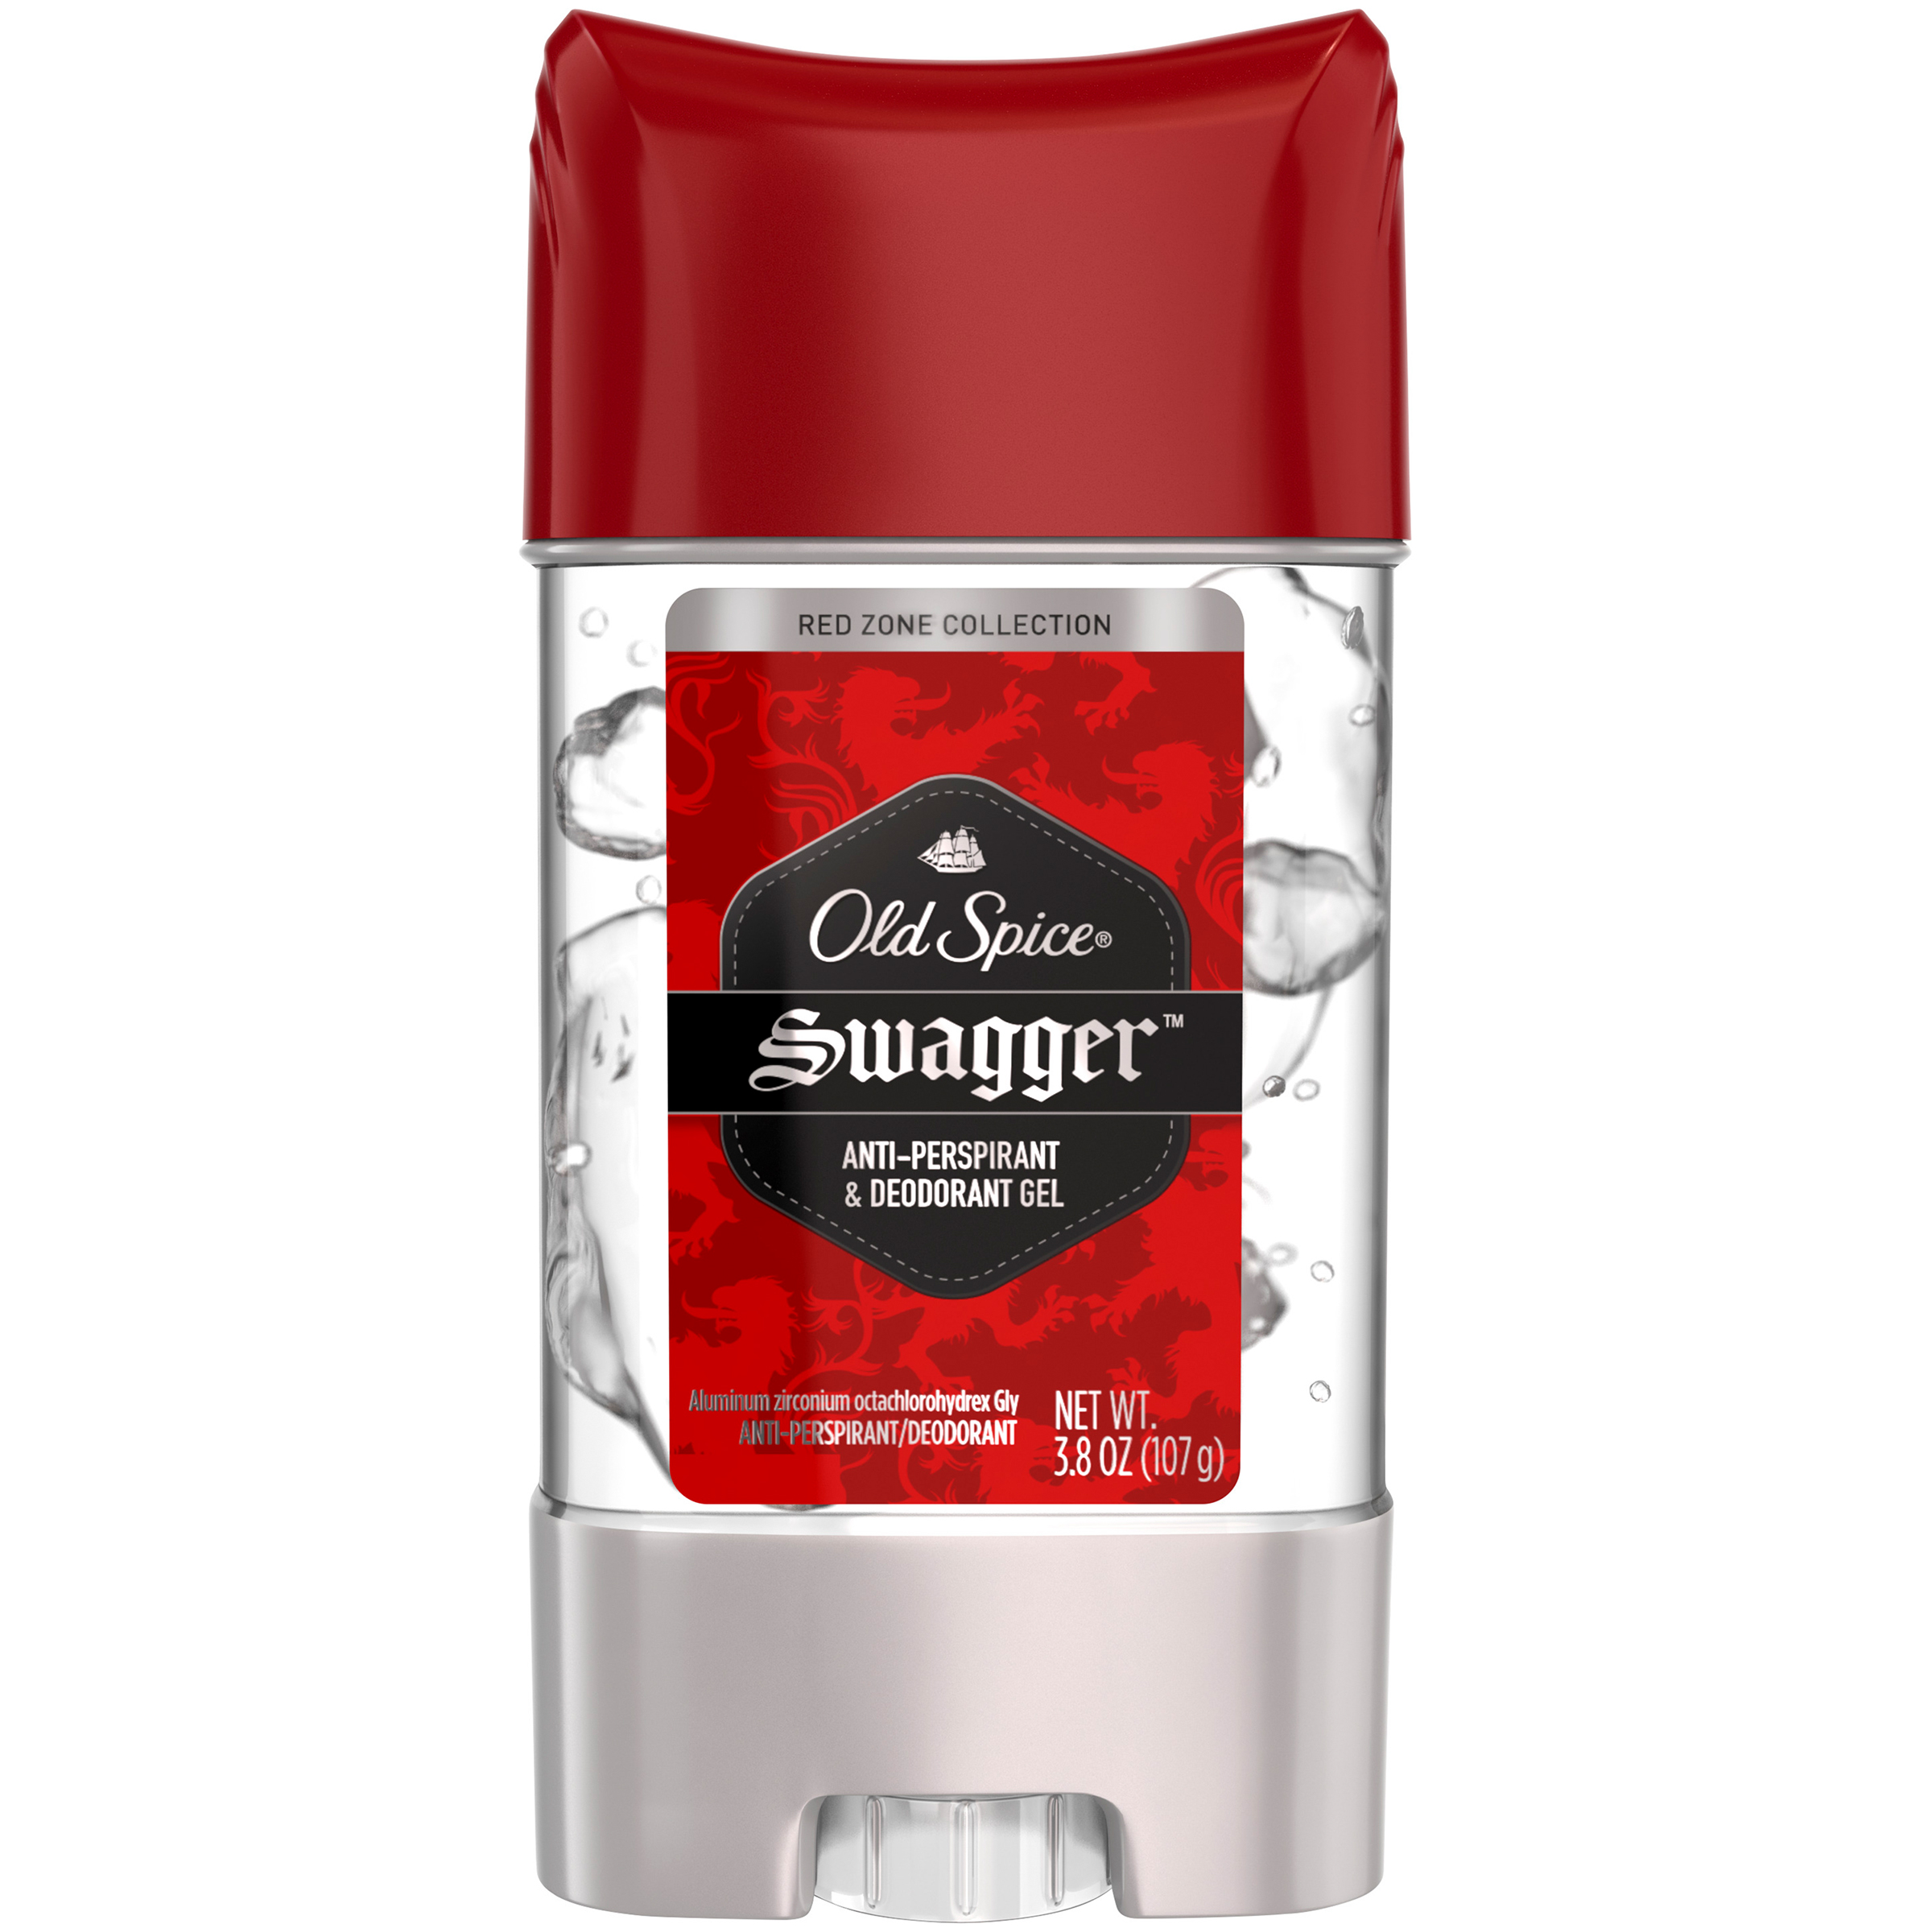 Red Zone Collection Antiperspirant & Deodorant Gel, Swagger 4 oz